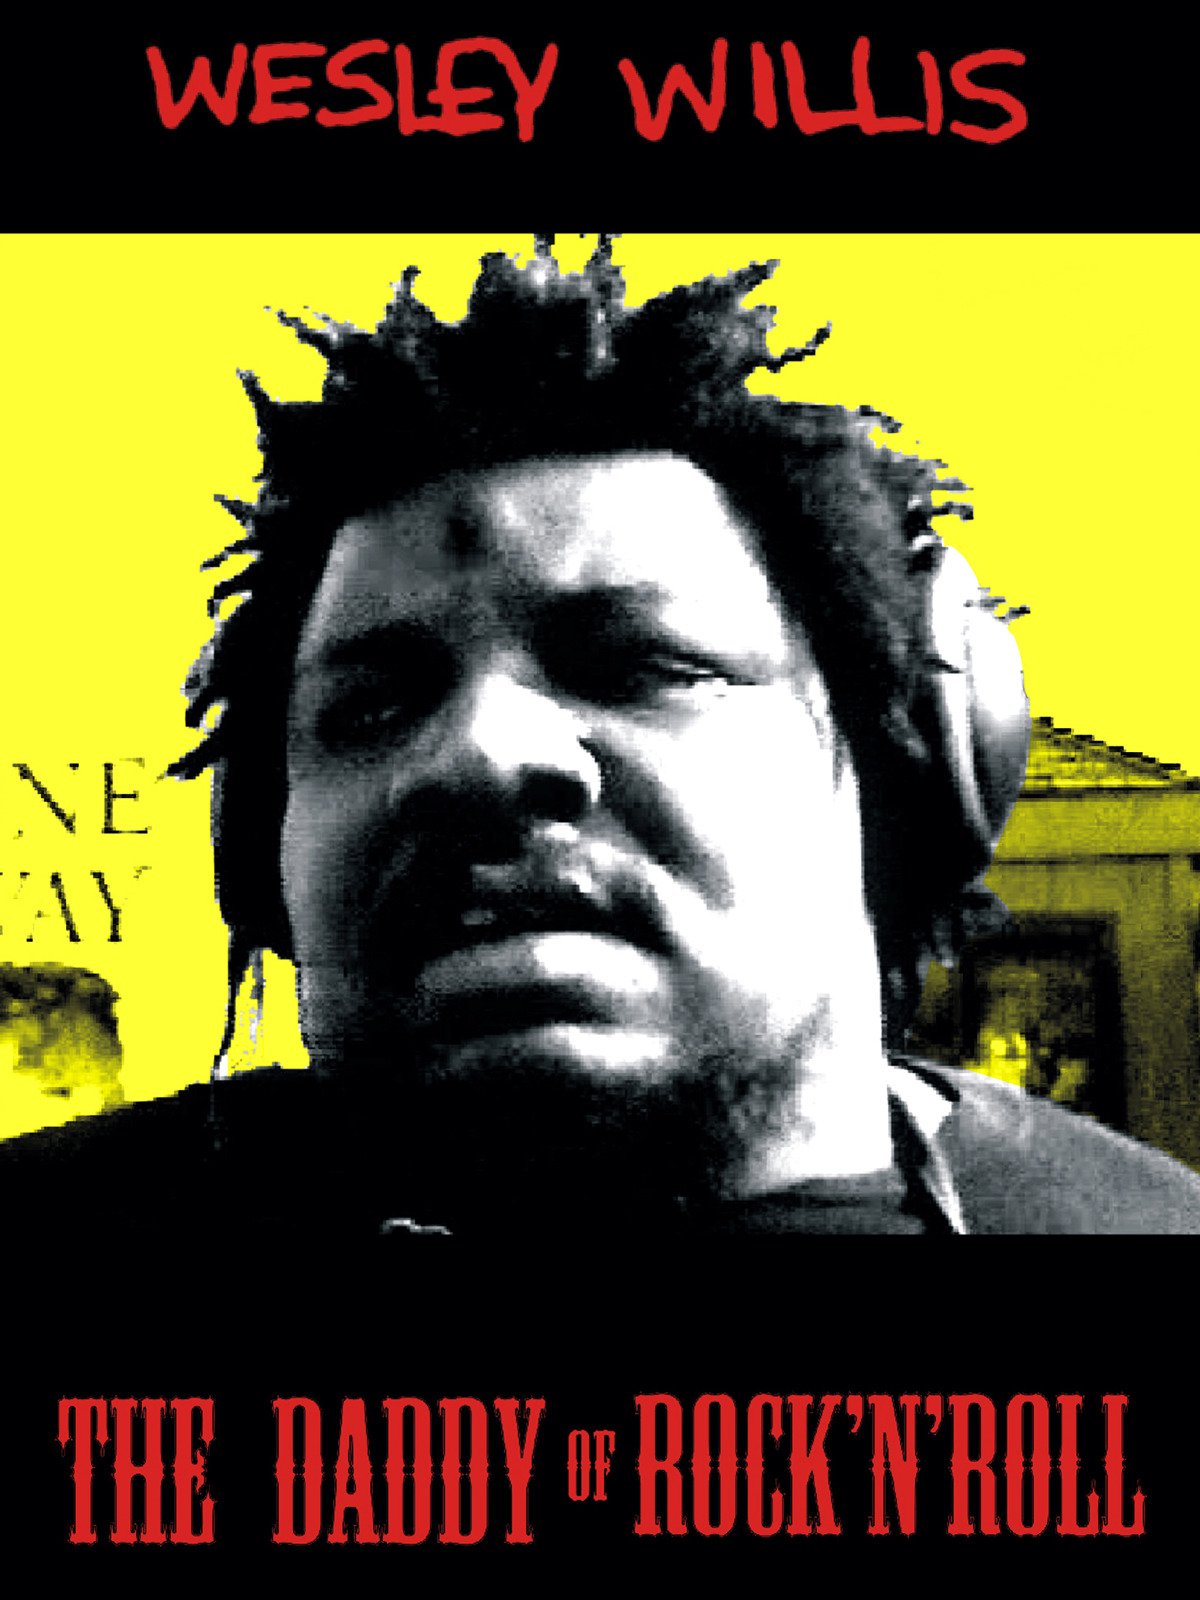 Wesley Willis "The Daddy of Rock N Roll" DVD